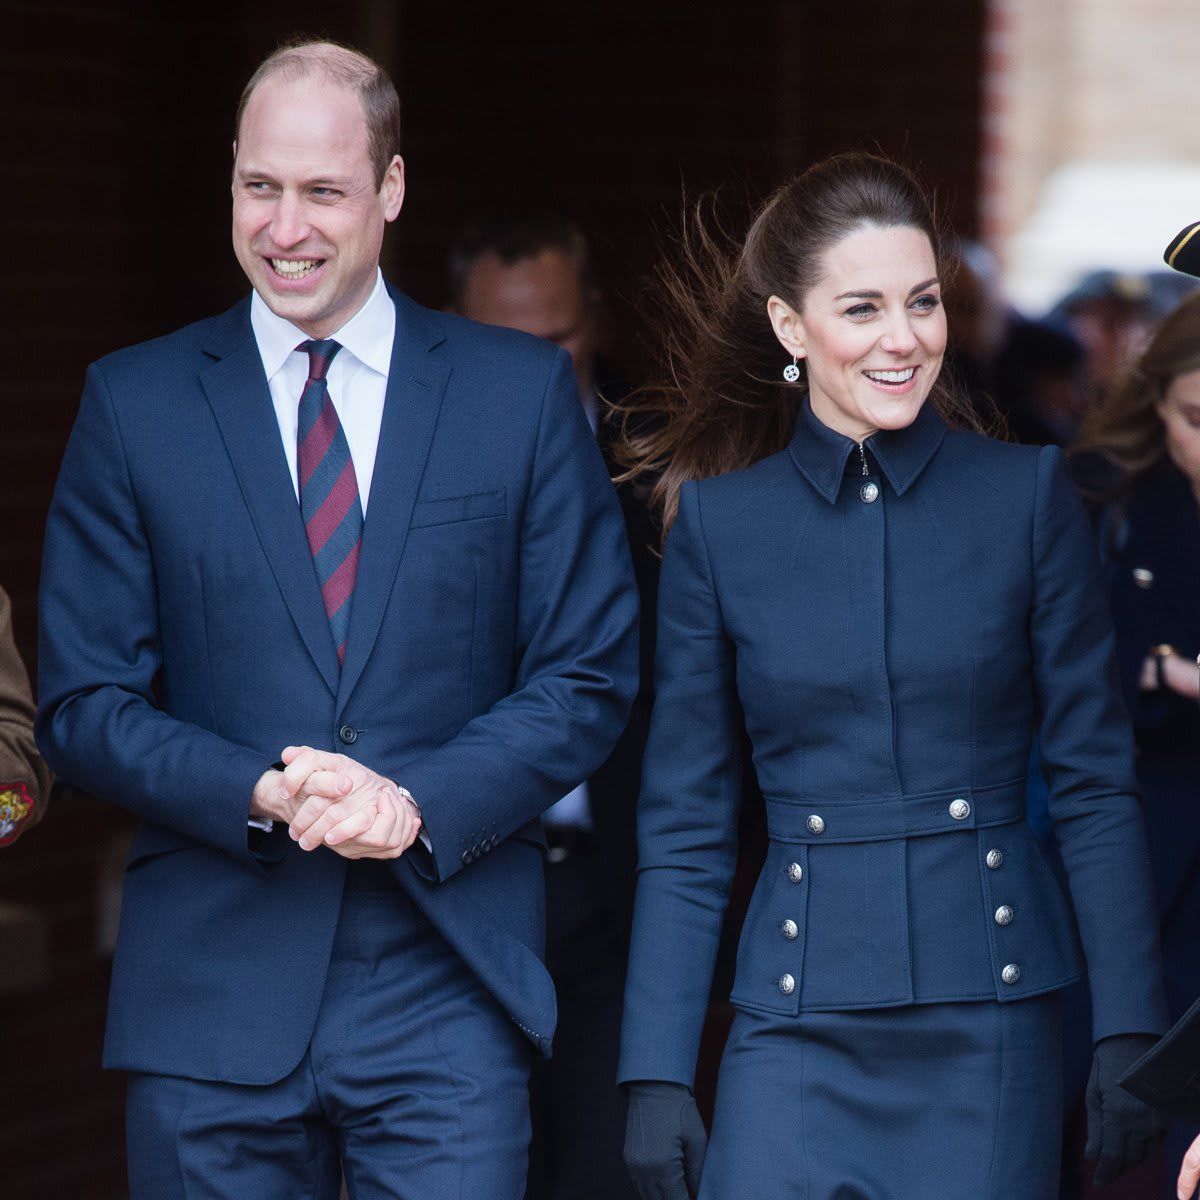 Prince William’s friend Bear welcomed his third child in May